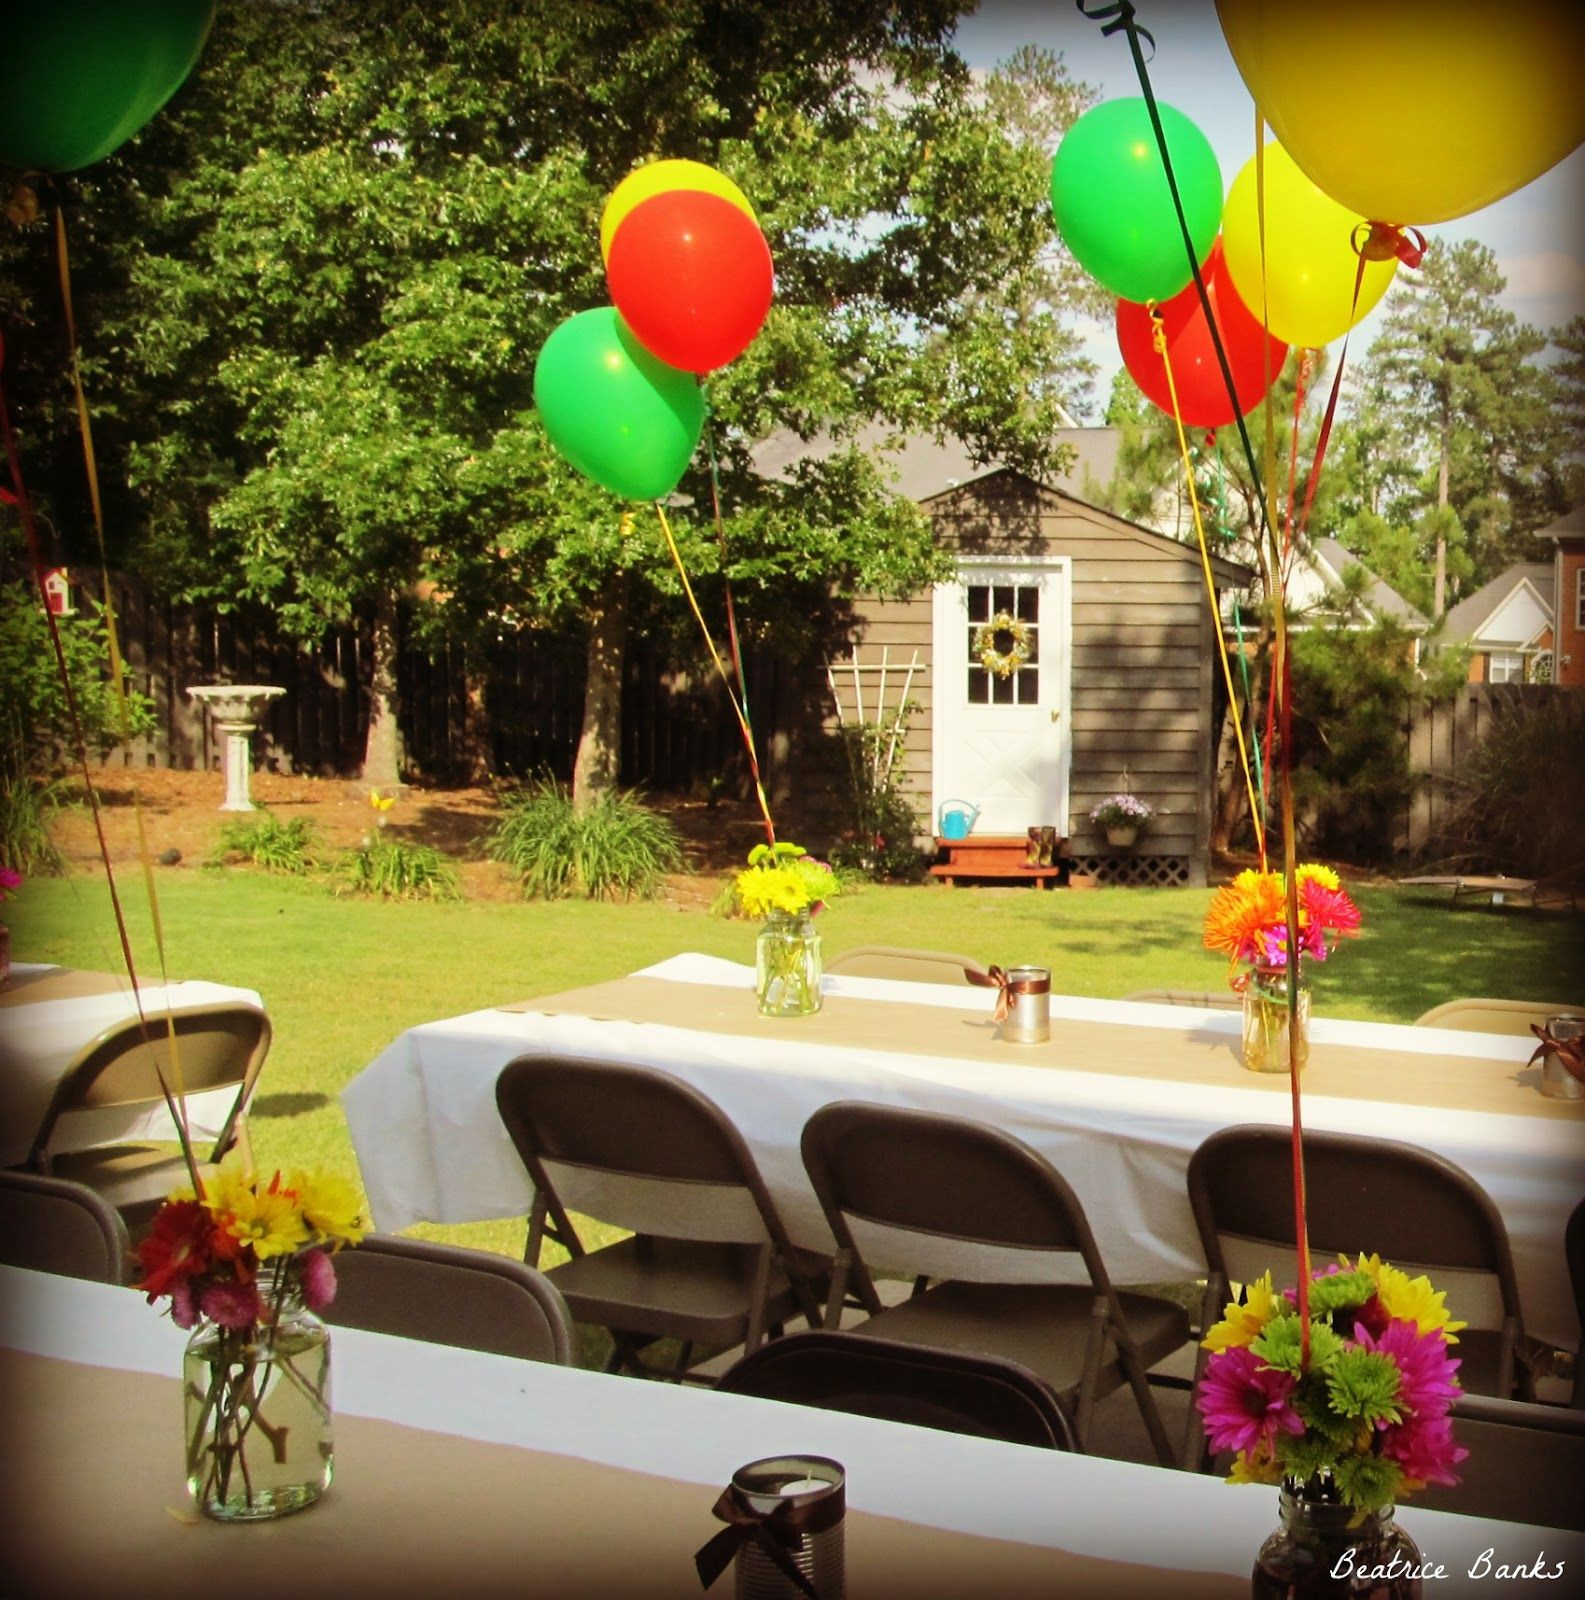 Backyard Graduation Party Decorations
 Backyard Graduation Party Beatrice Banks With images